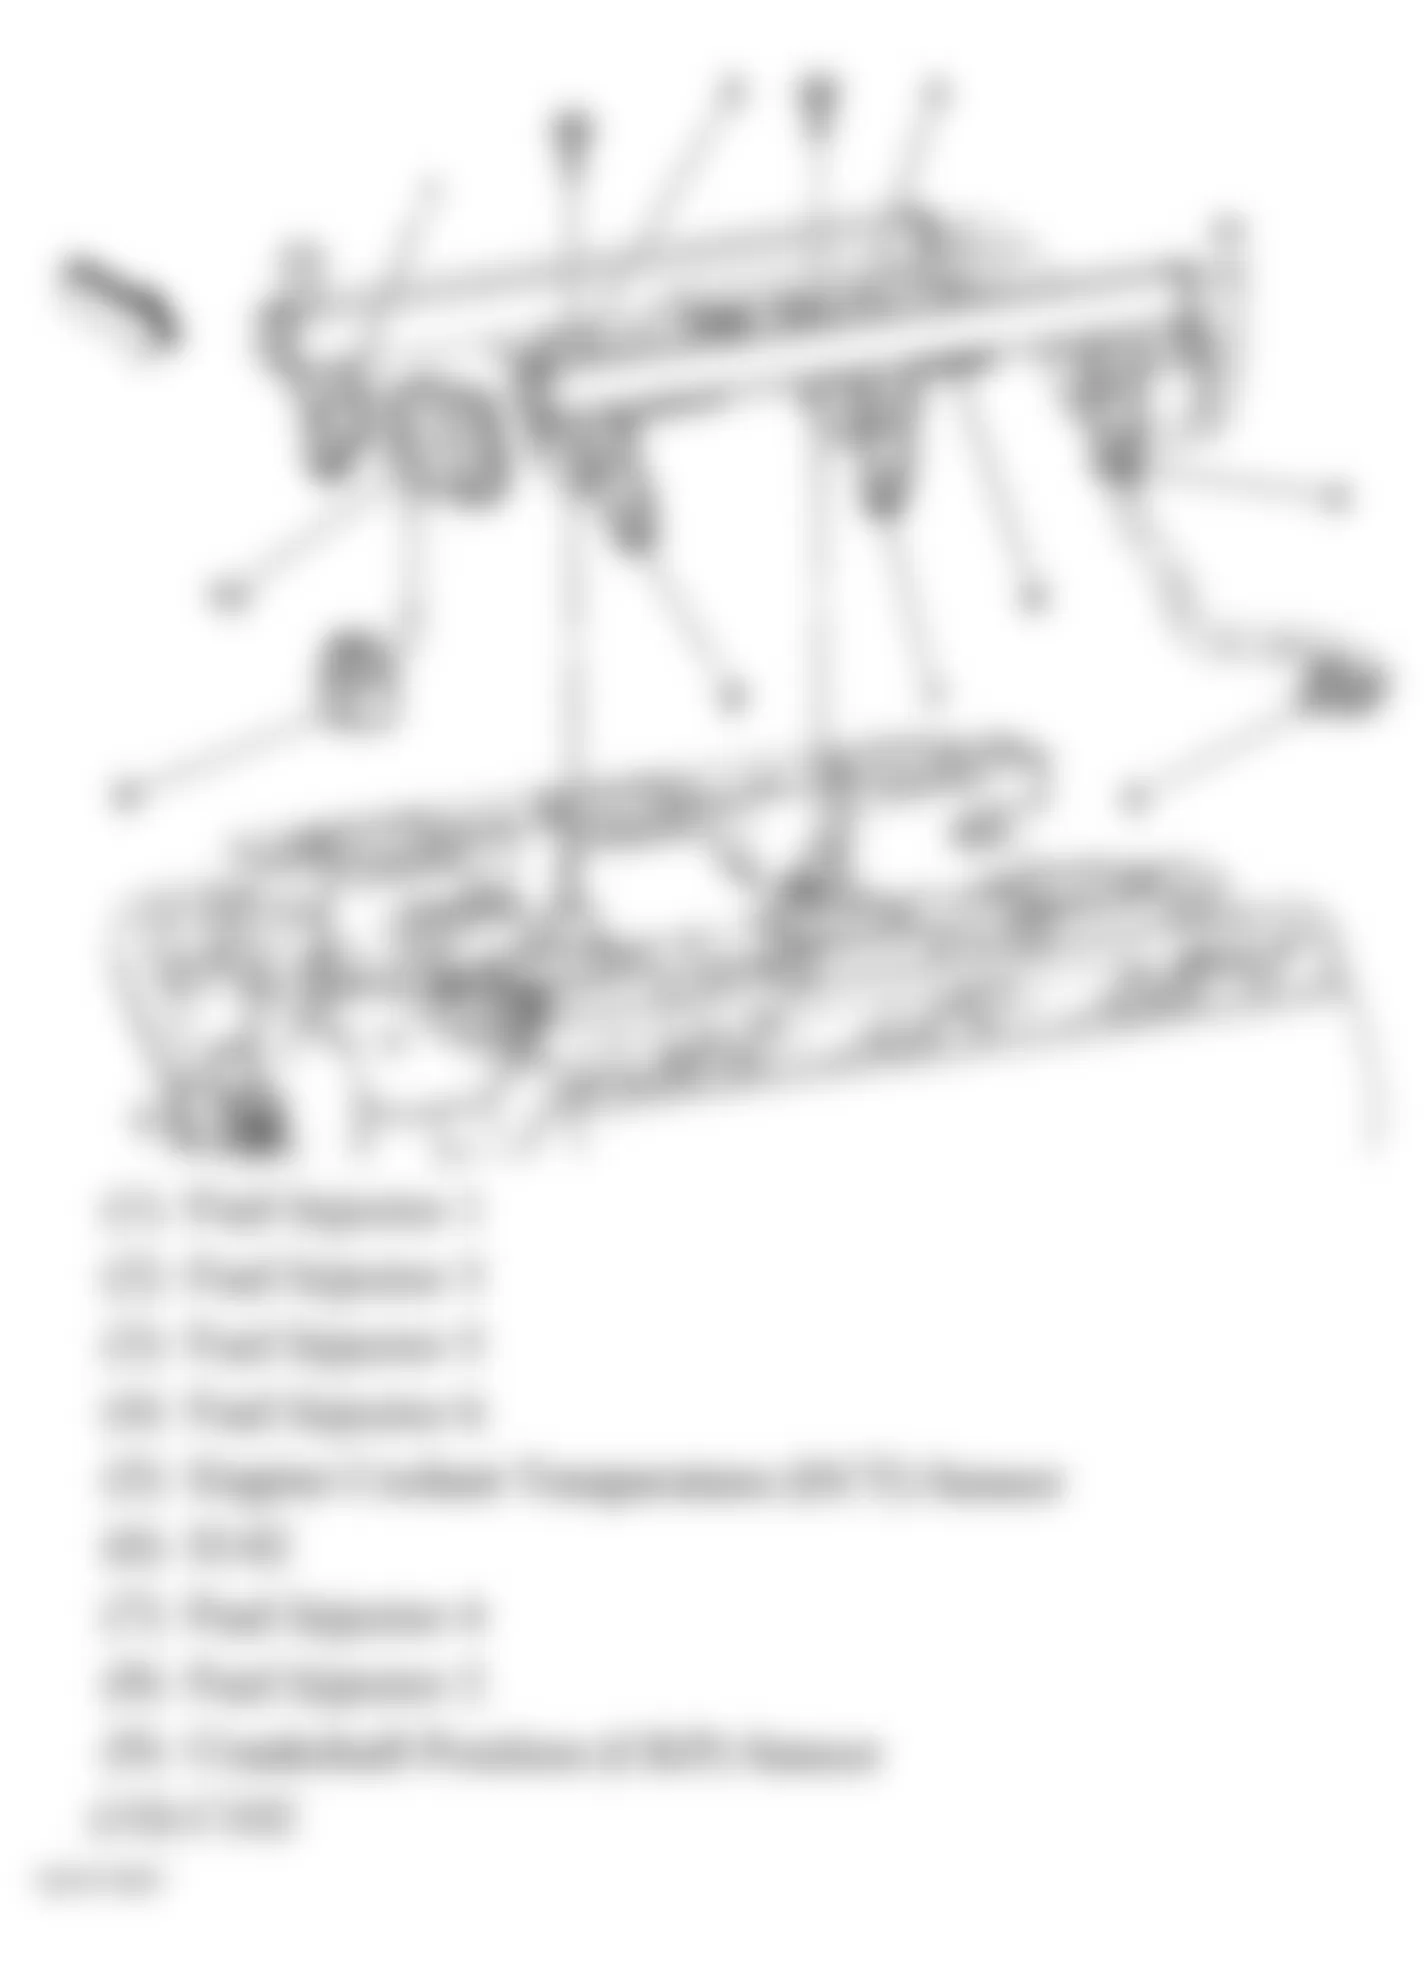 Buick Terraza CX 2006 - Component Locations -  Engine Assembly (3.9L)